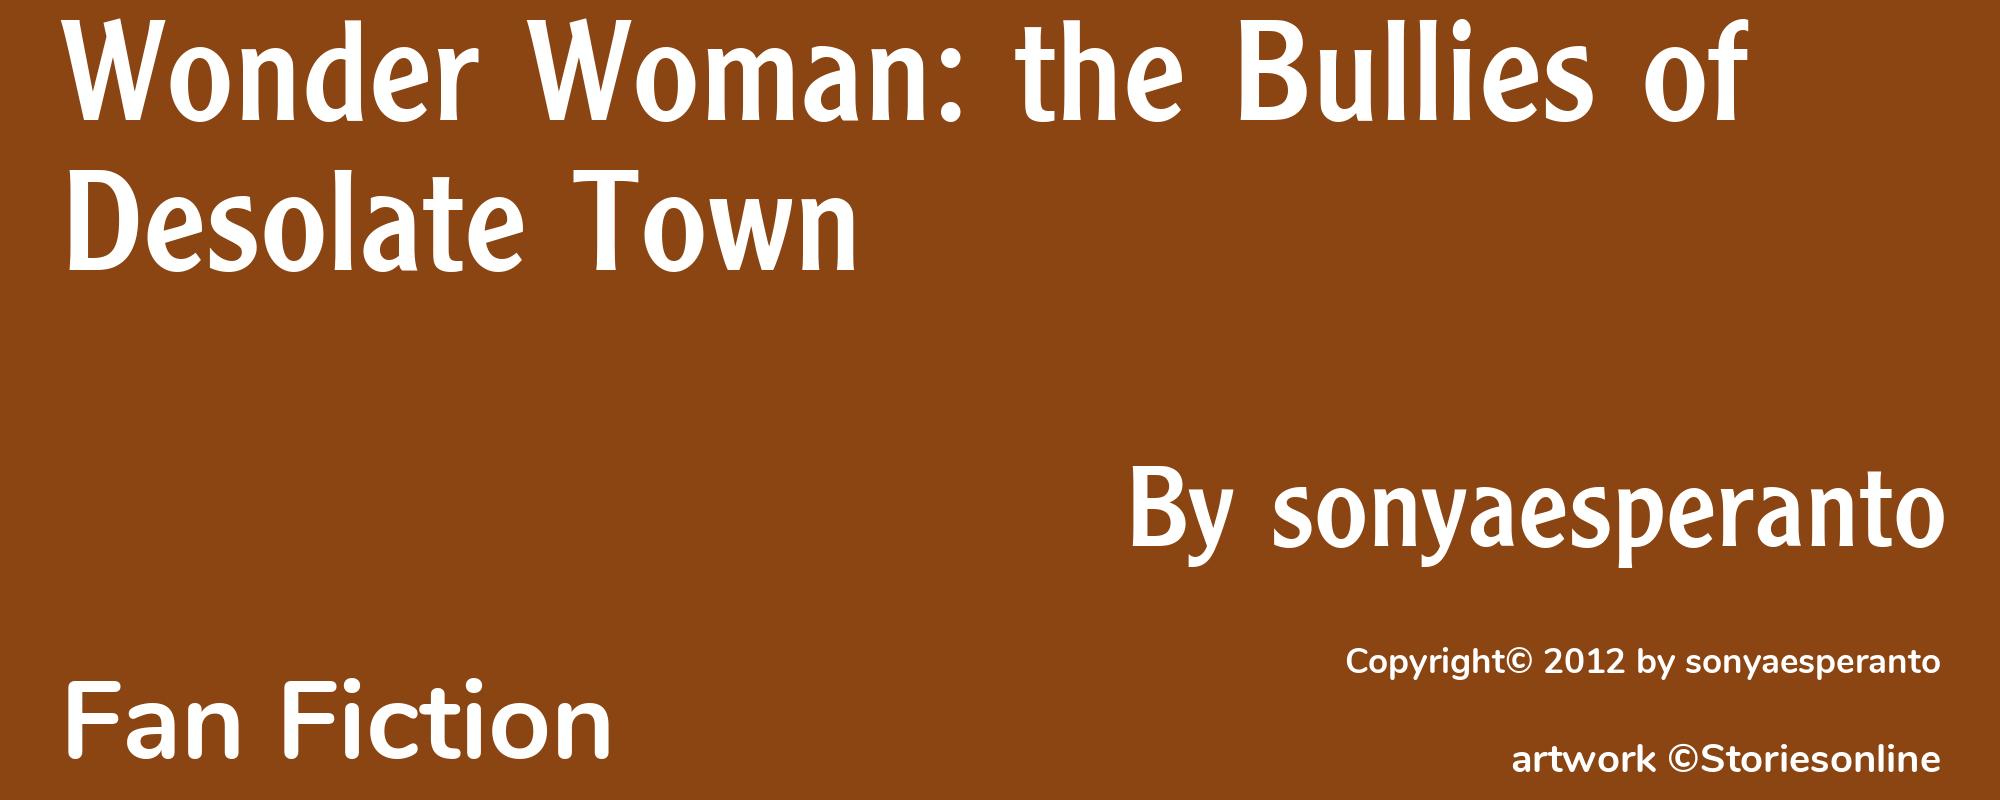 Wonder Woman: the Bullies of Desolate Town - Cover